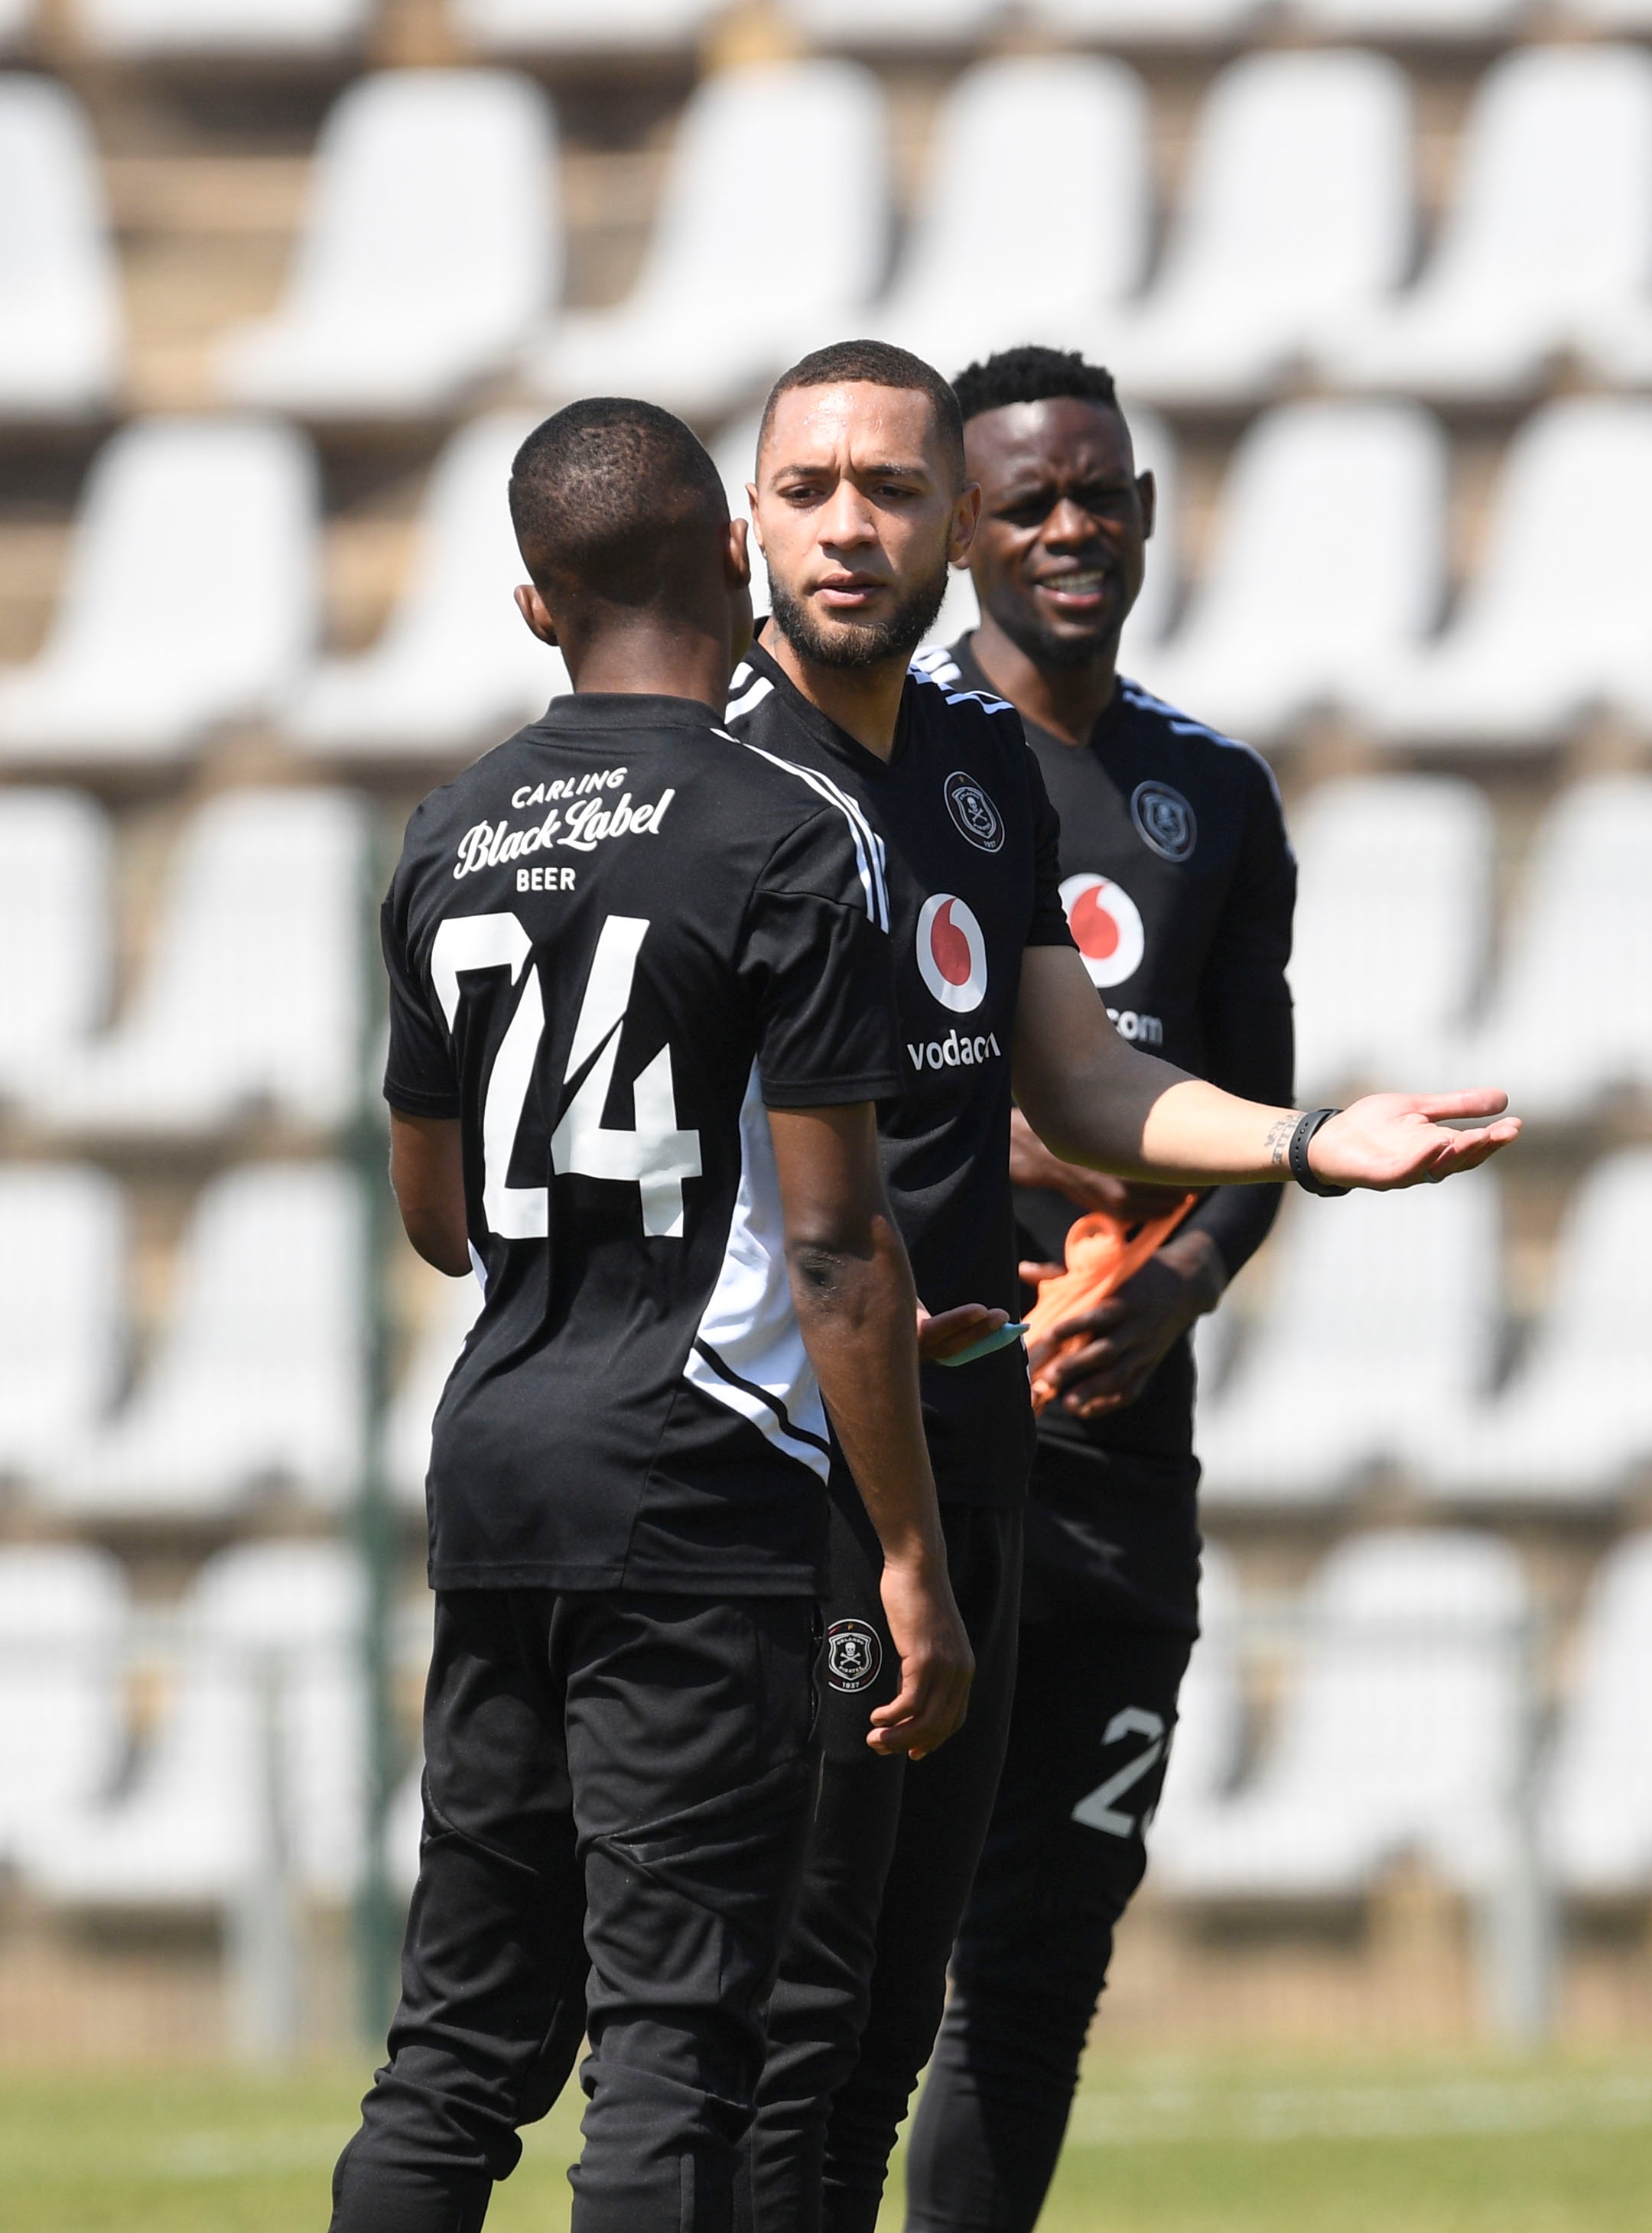 Pirates' Concerns On Two Stars